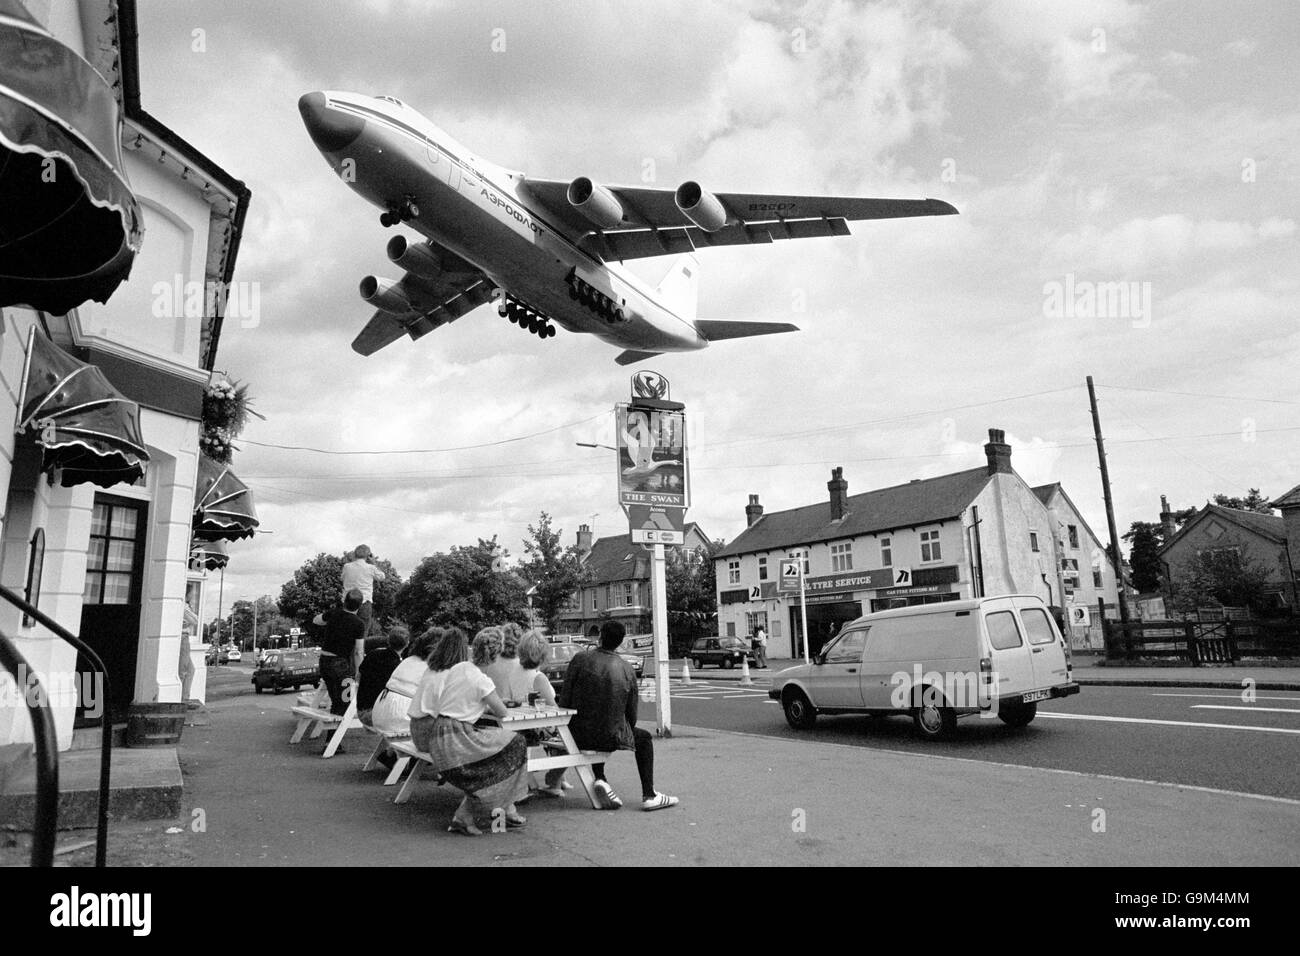 Customers enjoying a quiet lunchtime drink in Farnborough look skywards as a giant aircraft, the Soviet AN-124 transport plane, the biggest aircraft in the world, flies in for the Farnborough Air Show. Stock Photo